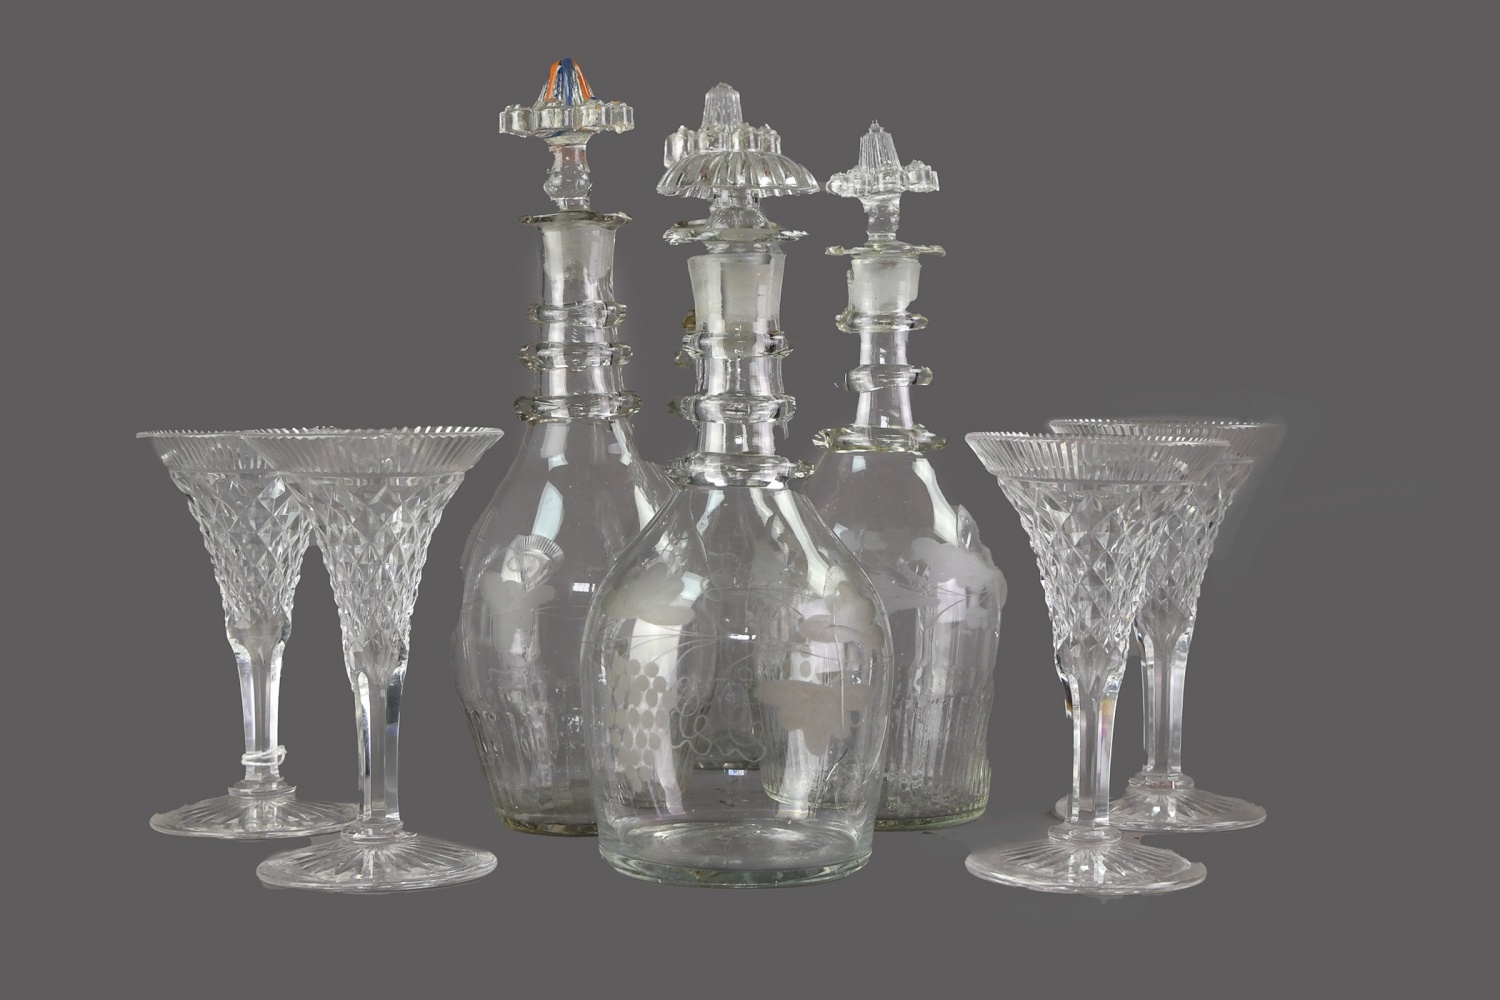 A COLLECTION OF FOUR LATE VICTORIAN GLASS DECANTERS, ALONG WITH FOUR WINE GLASSES